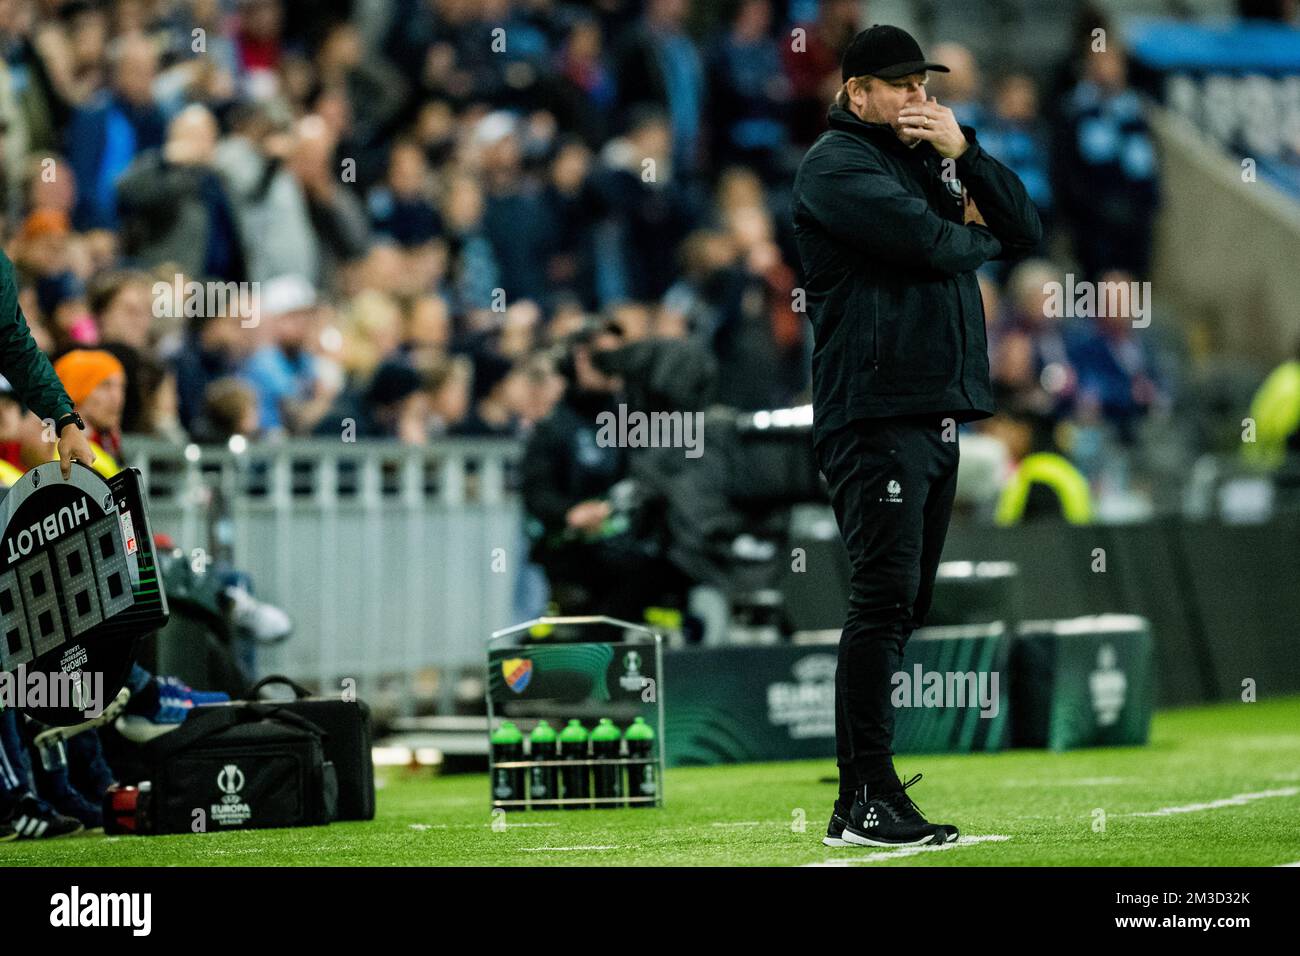 Gent's head coach Hein Vanhaezebrouck reacts during a soccer match between Swedish Djurgardens IF and Belgian KAA Gent, Thursday 13 October 2022 in Stockholm, Sweden , on day four of the UEFA Europa Conference League group stage. BELGA PHOTO JASPER JACOBS Stock Photo